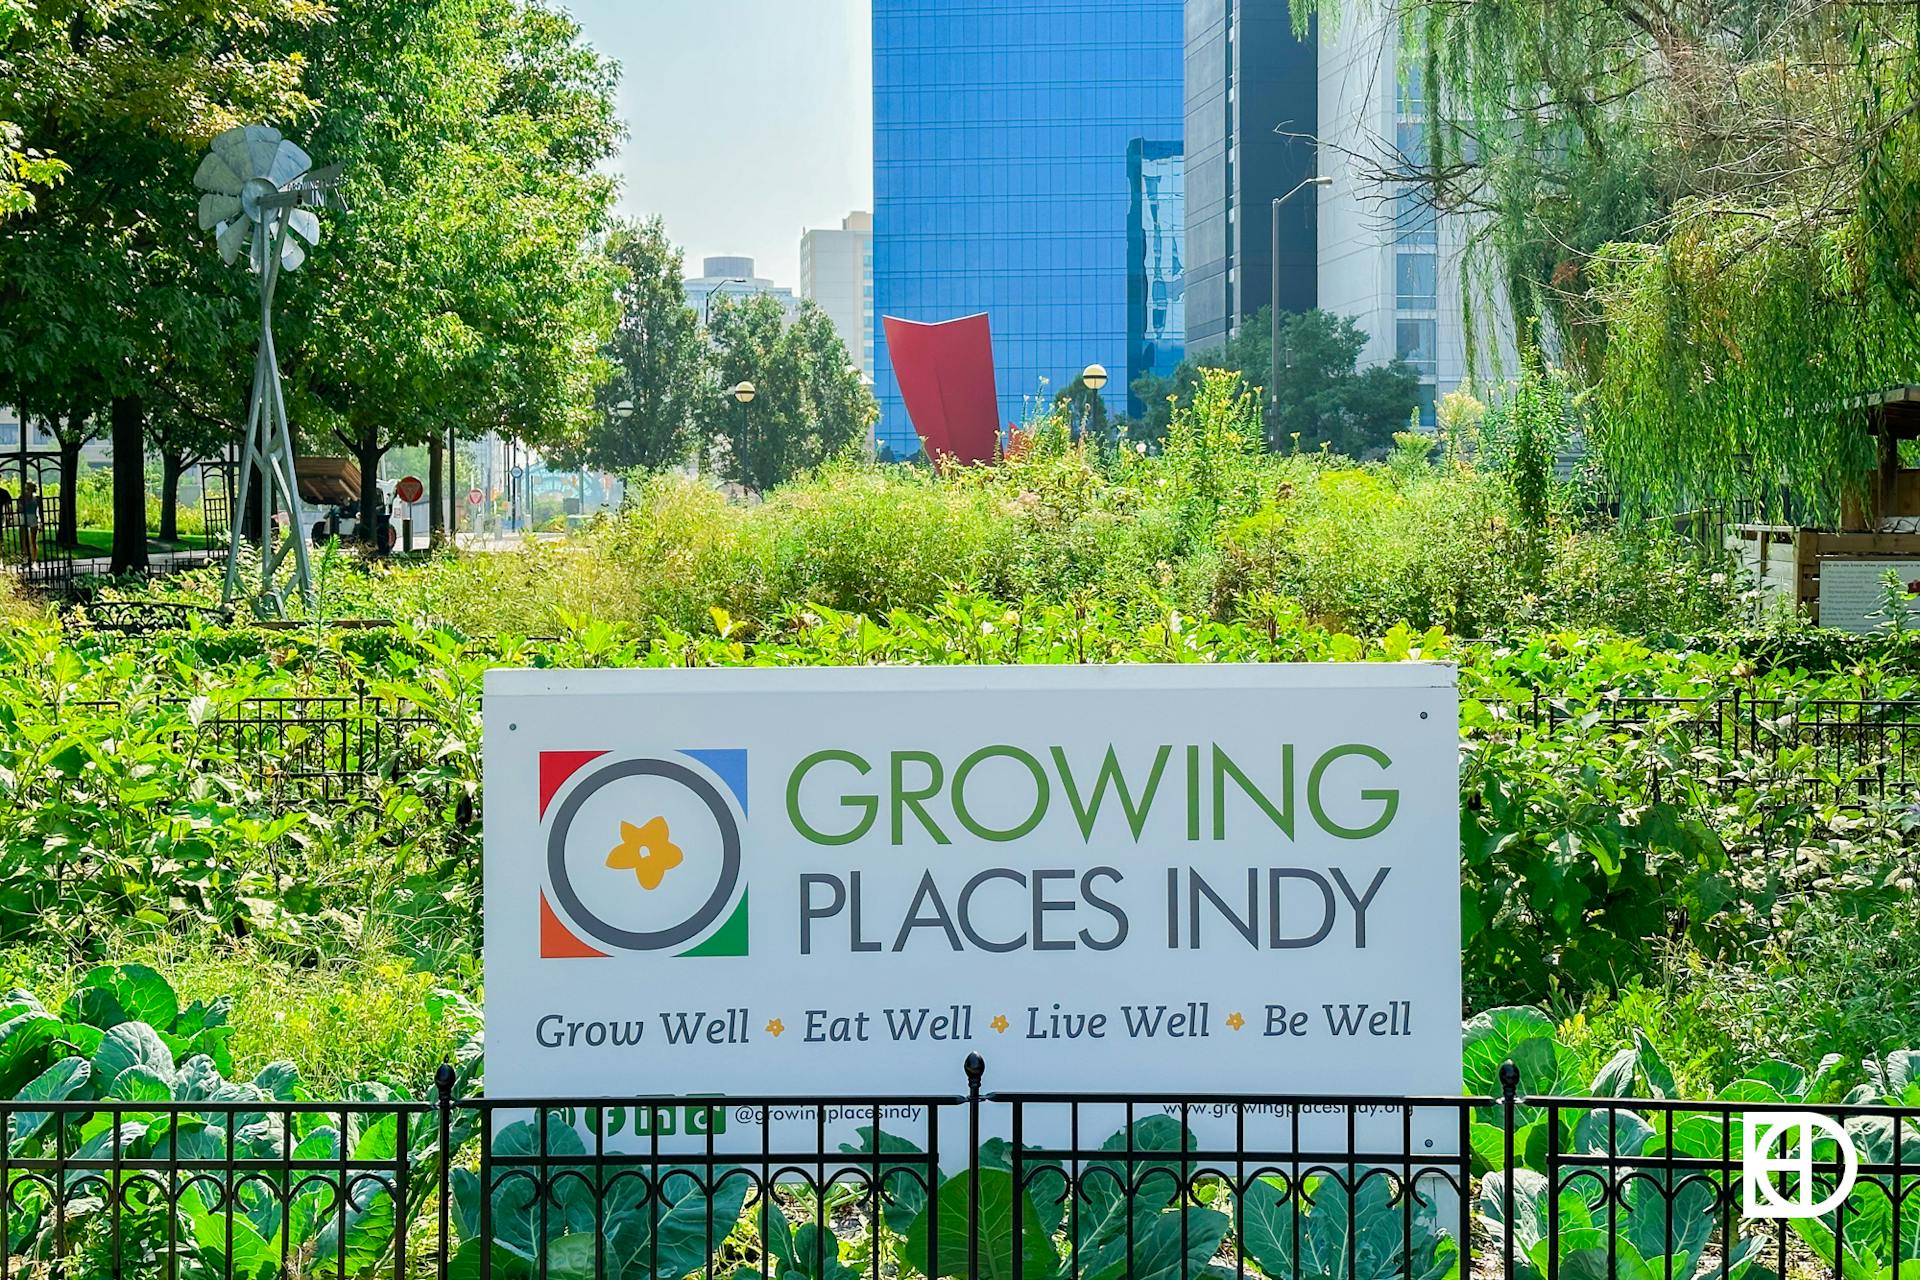 Photo of signage and garden at Growing Places Indy on the East Side